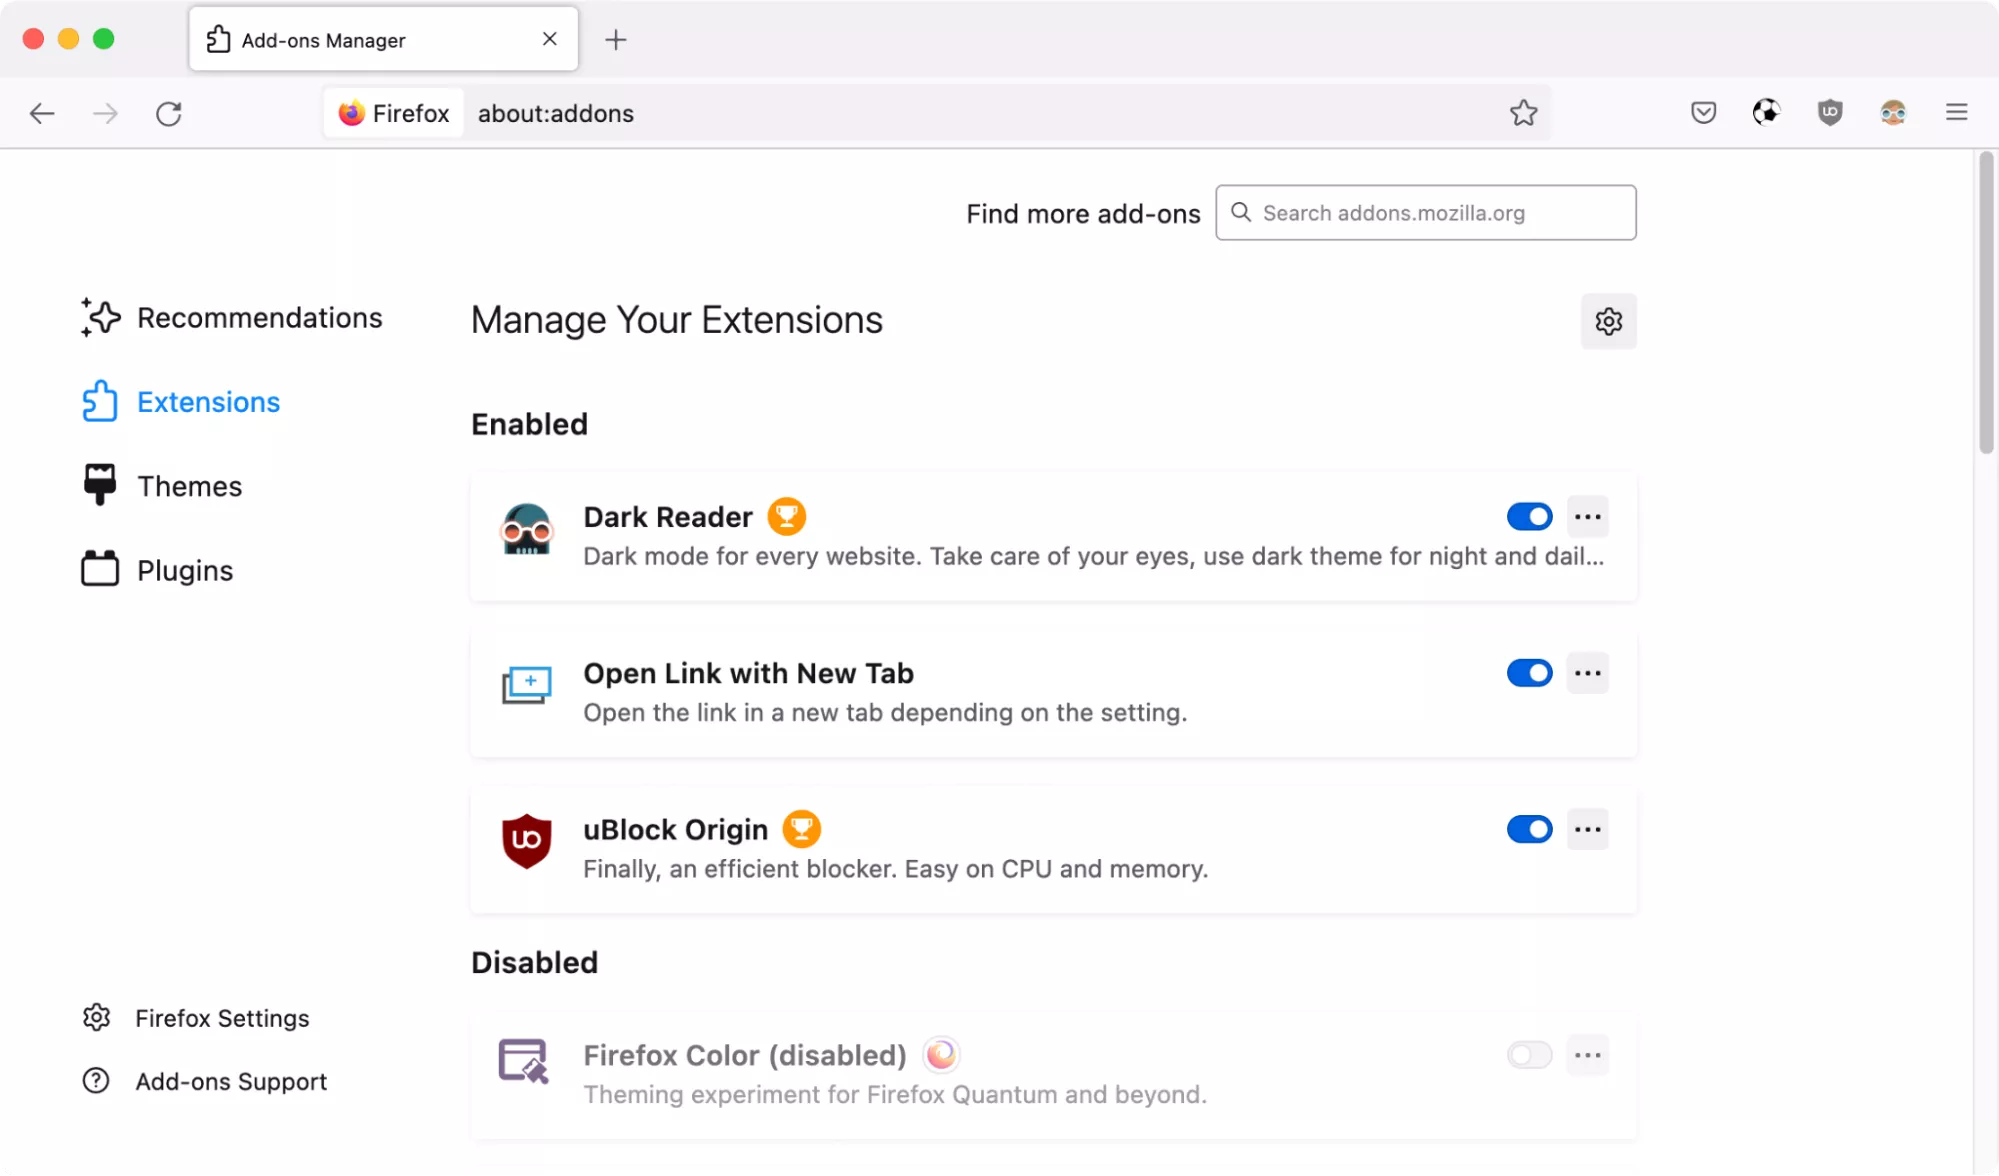 Firefox Settings > Add-ons and themes